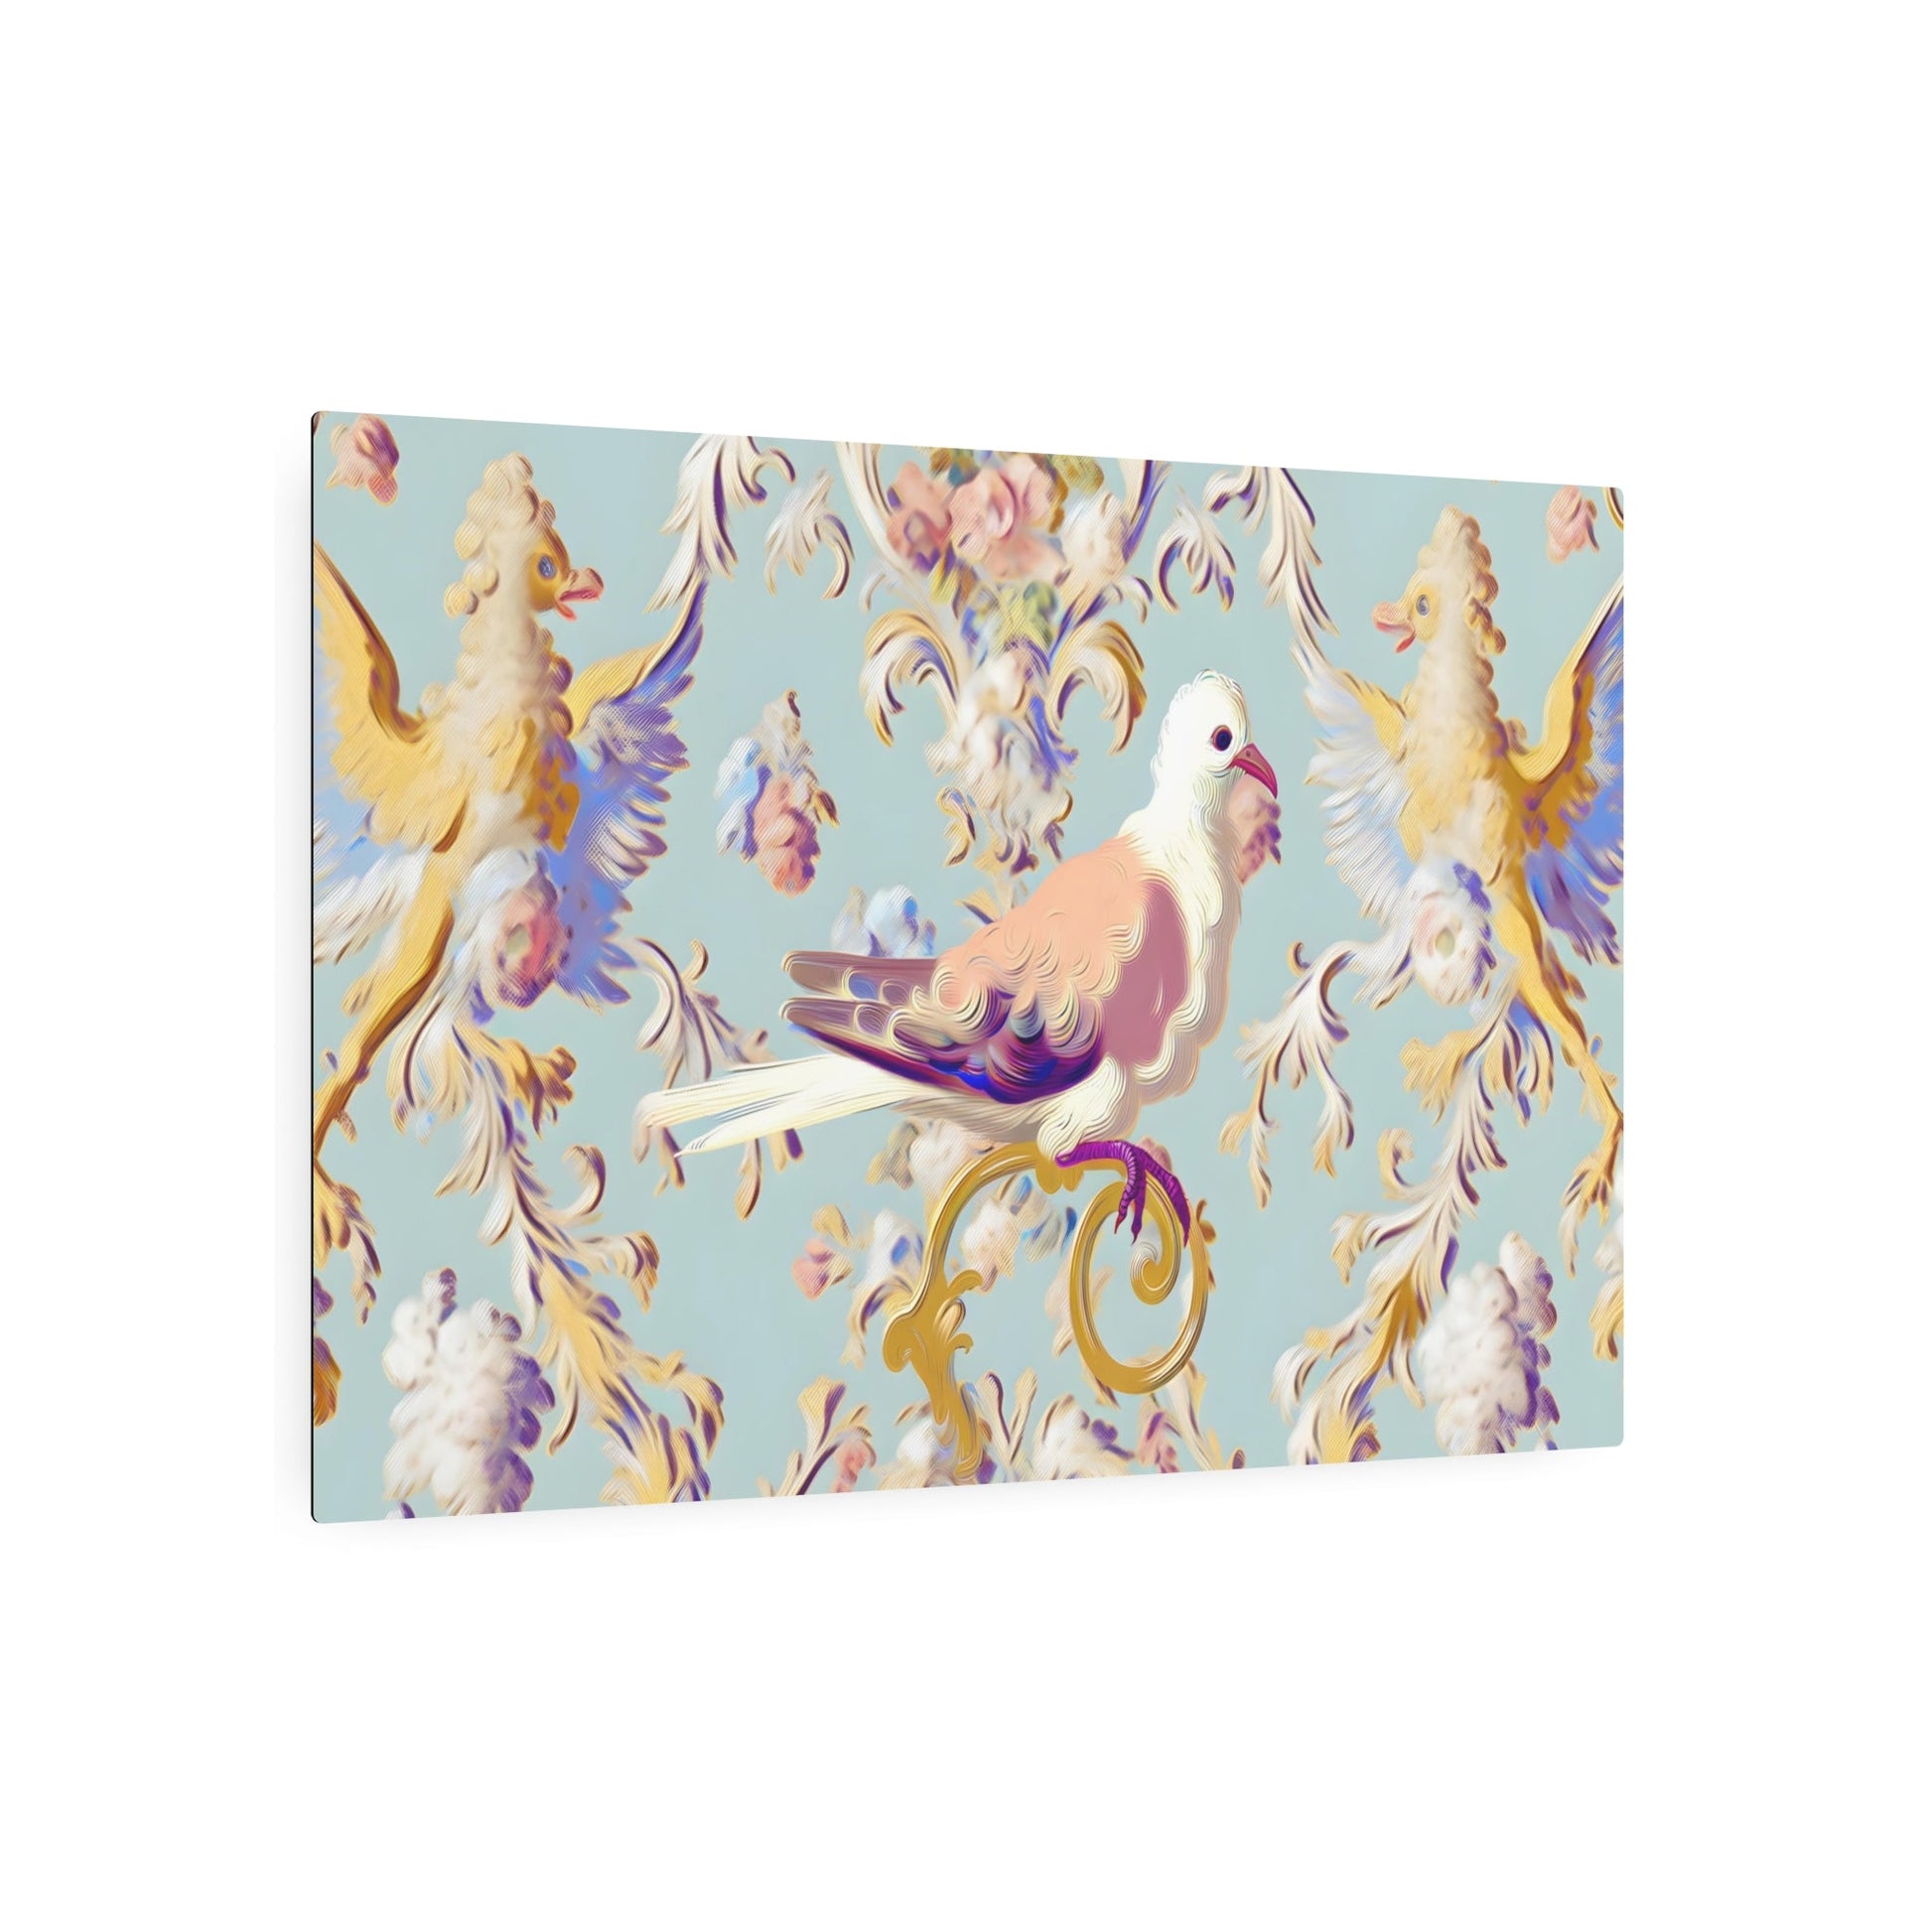 Metal Poster Art | "Pastel Rococo Style Western Art Painting - Intricate Opulent Bird Scene with Playful Ornate Detailing" - Metal Poster Art 36″ x 24″ (Horizontal) 0.12''